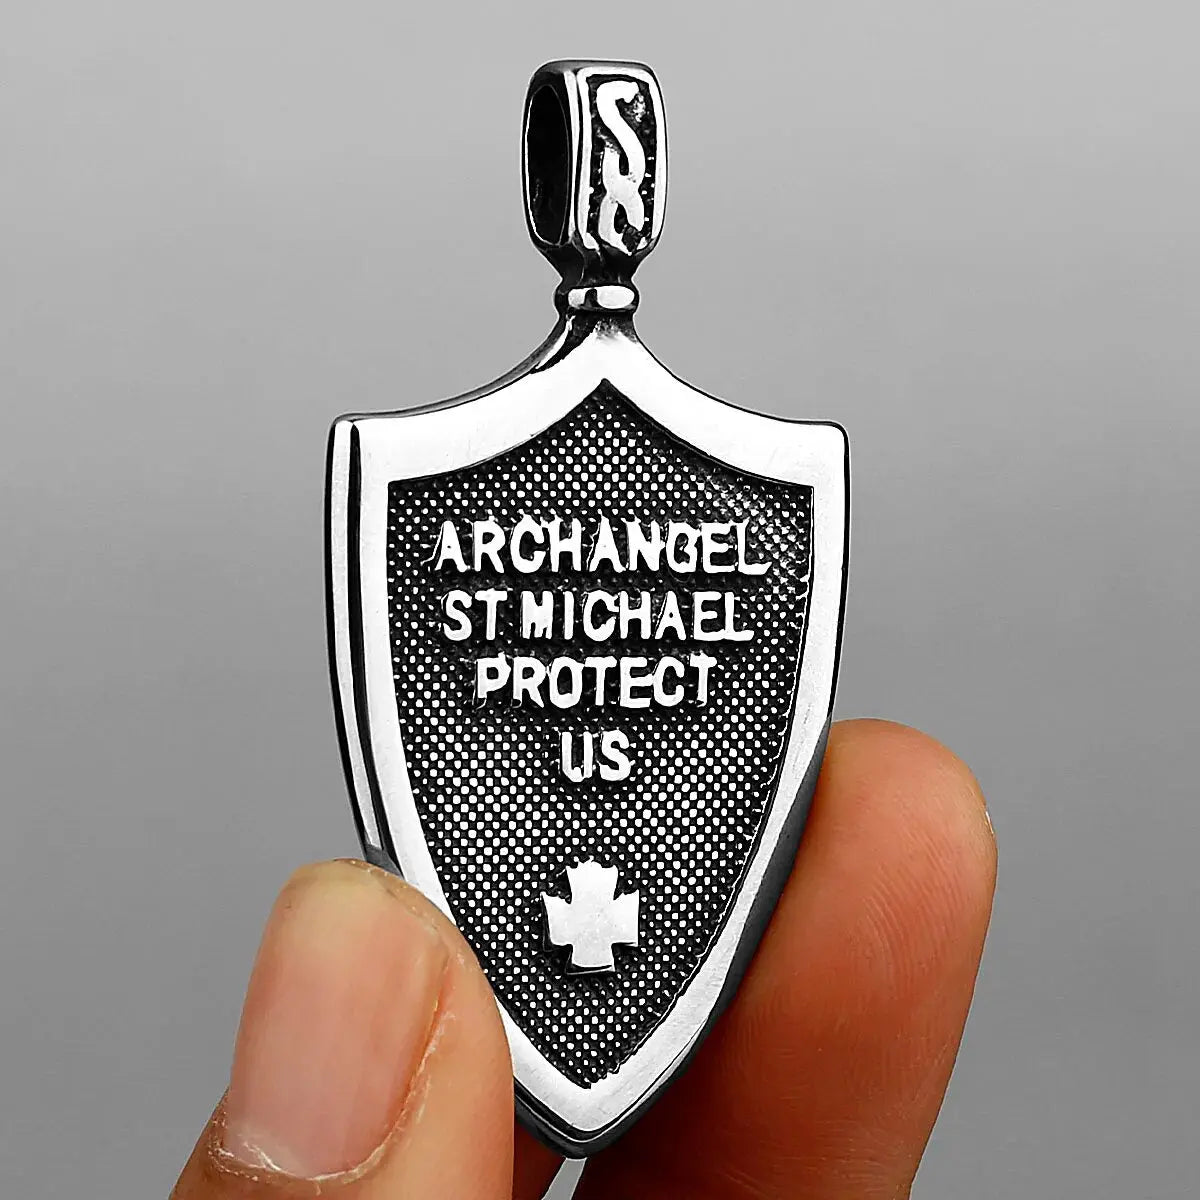 a person holding a small metal badge with a cross on it